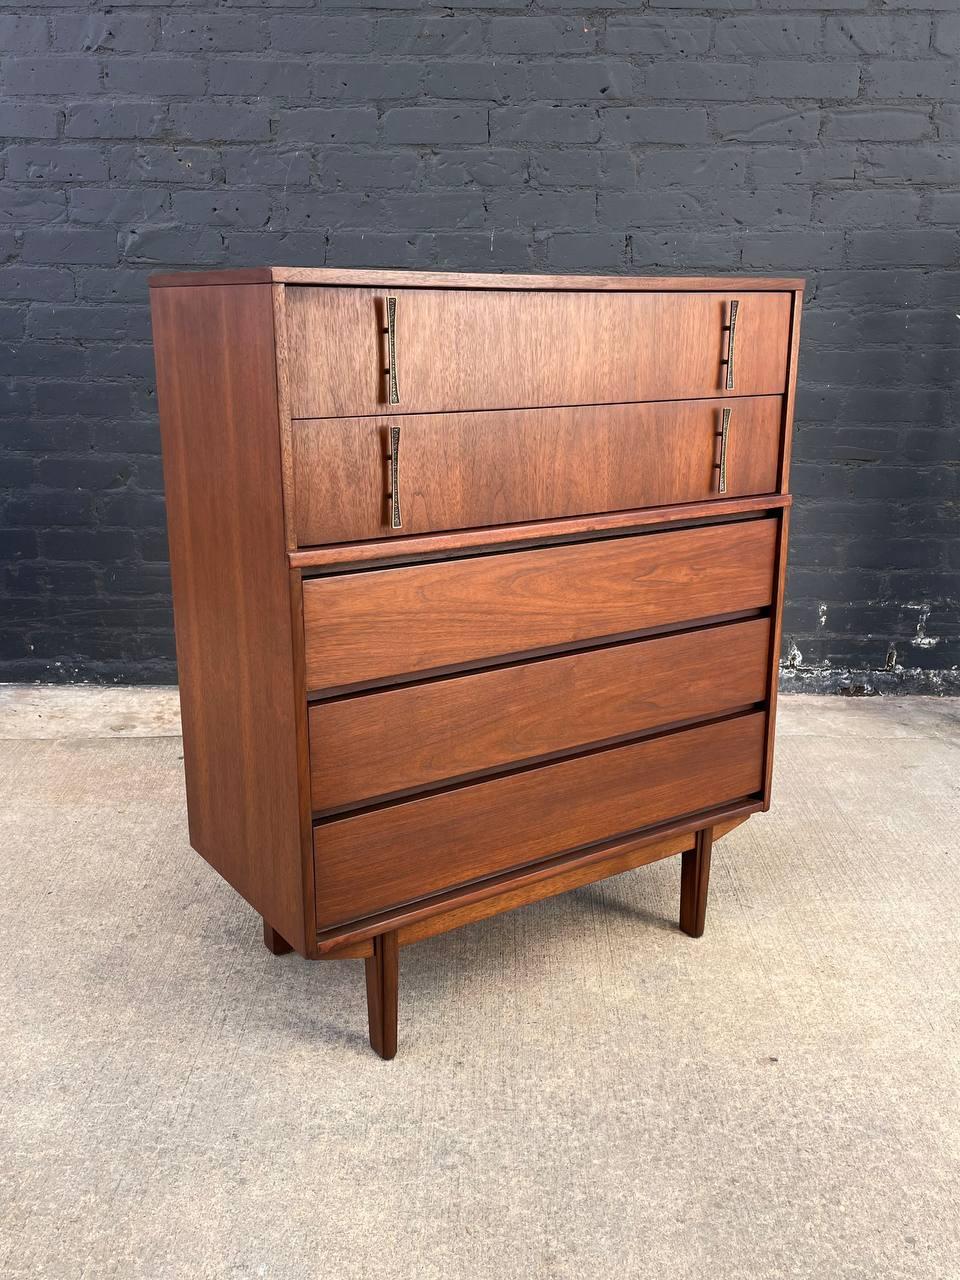 Newly Refinished - Mid-Century Modern Walnut Highboy Dresser In Excellent Condition For Sale In Los Angeles, CA